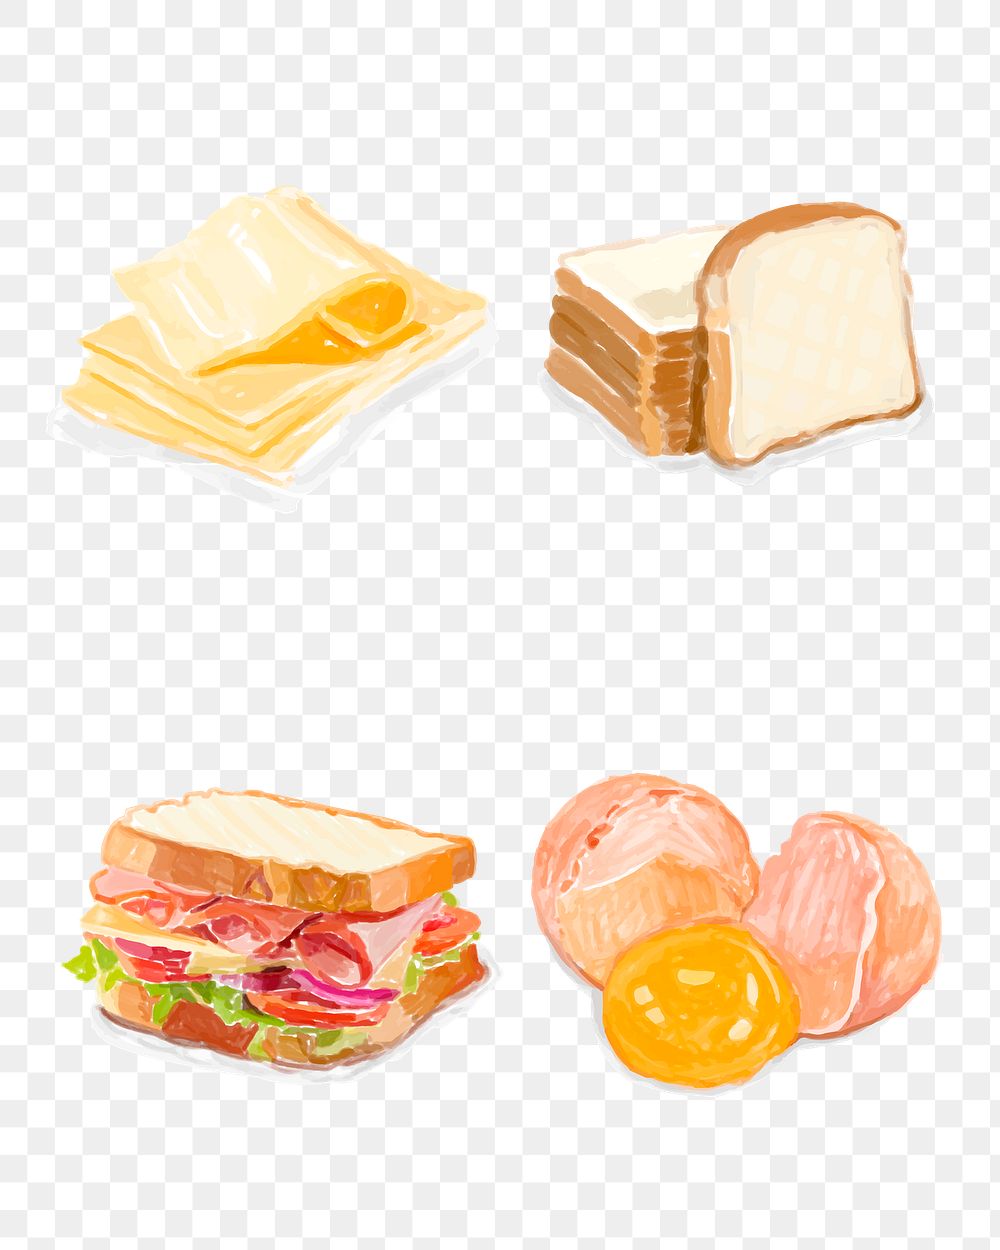 Sandwich ingredients png sticker watercolor drawing collection